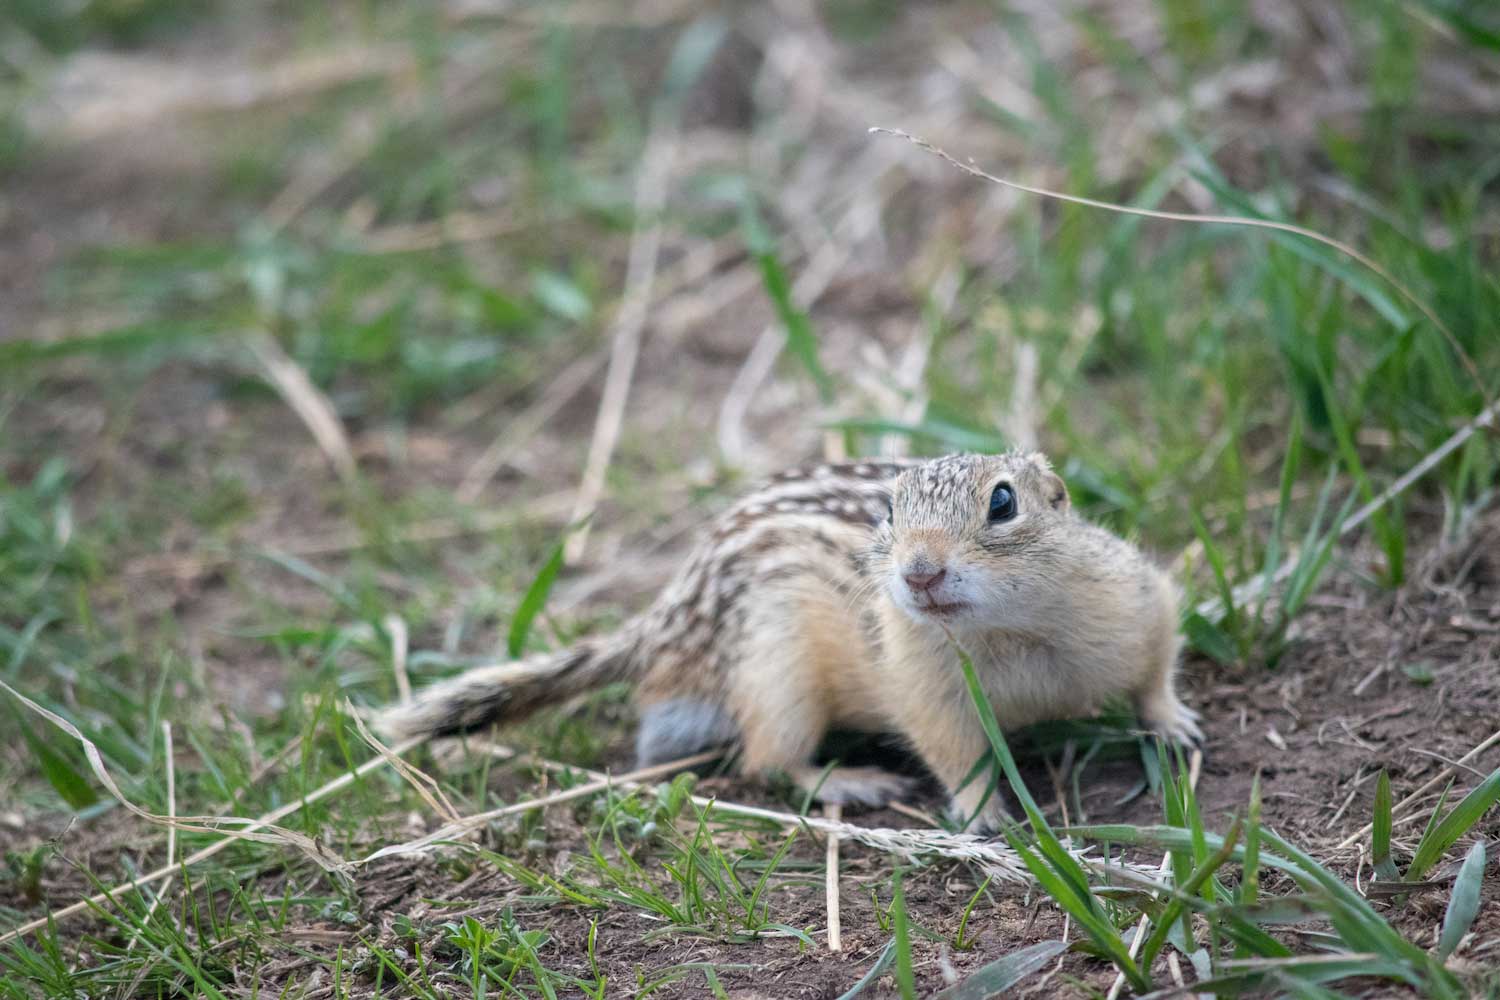 A 13-lined ground squirrel on the ground